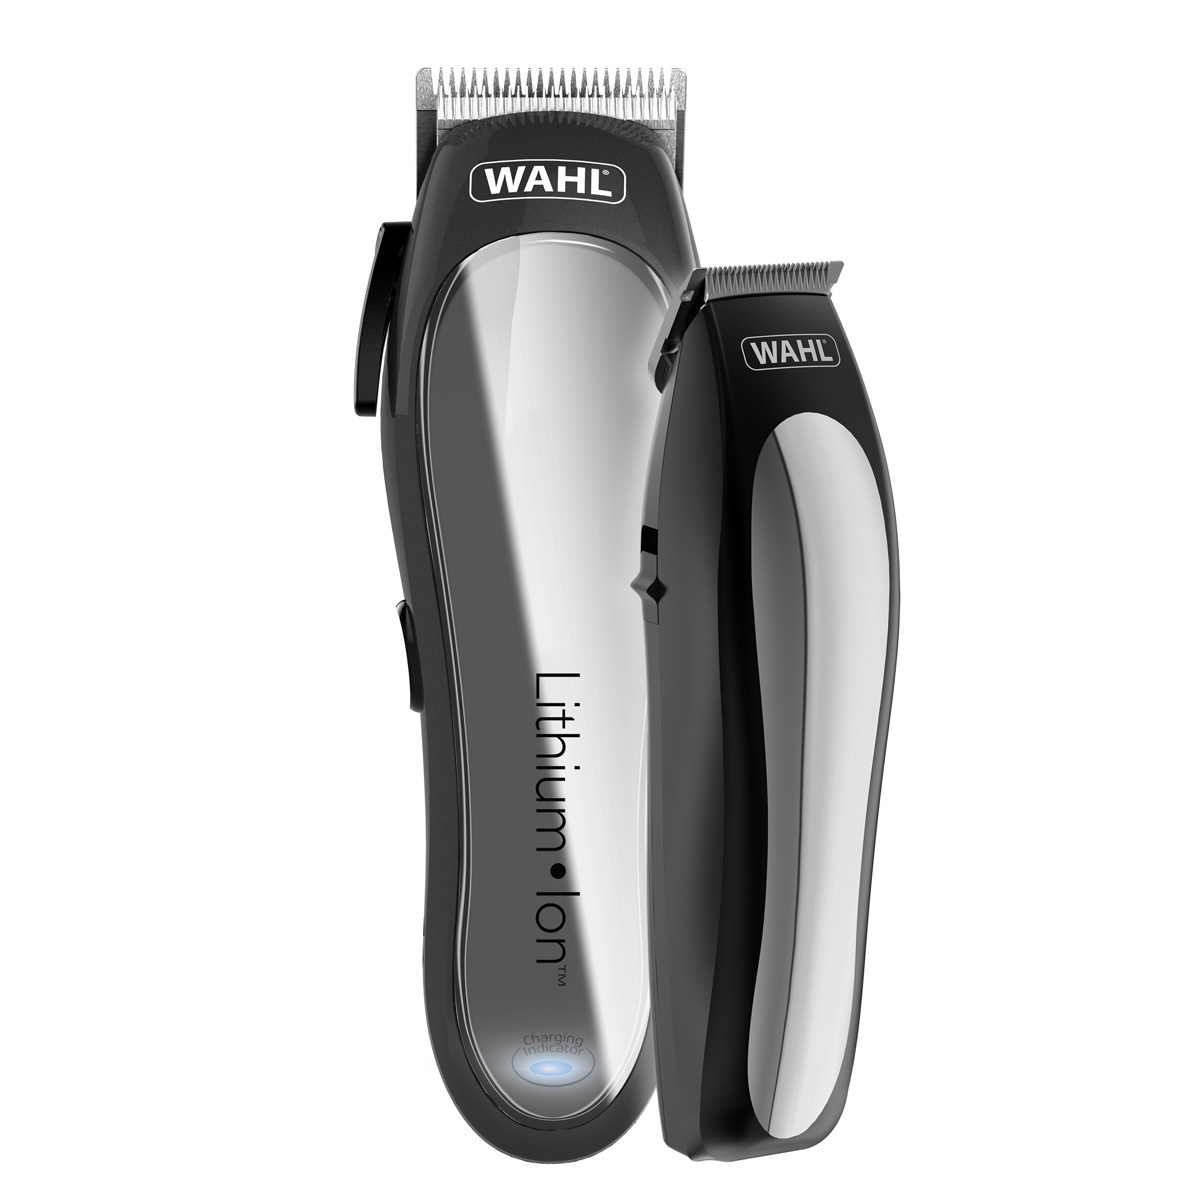 wahl hair clippers how to cut hair